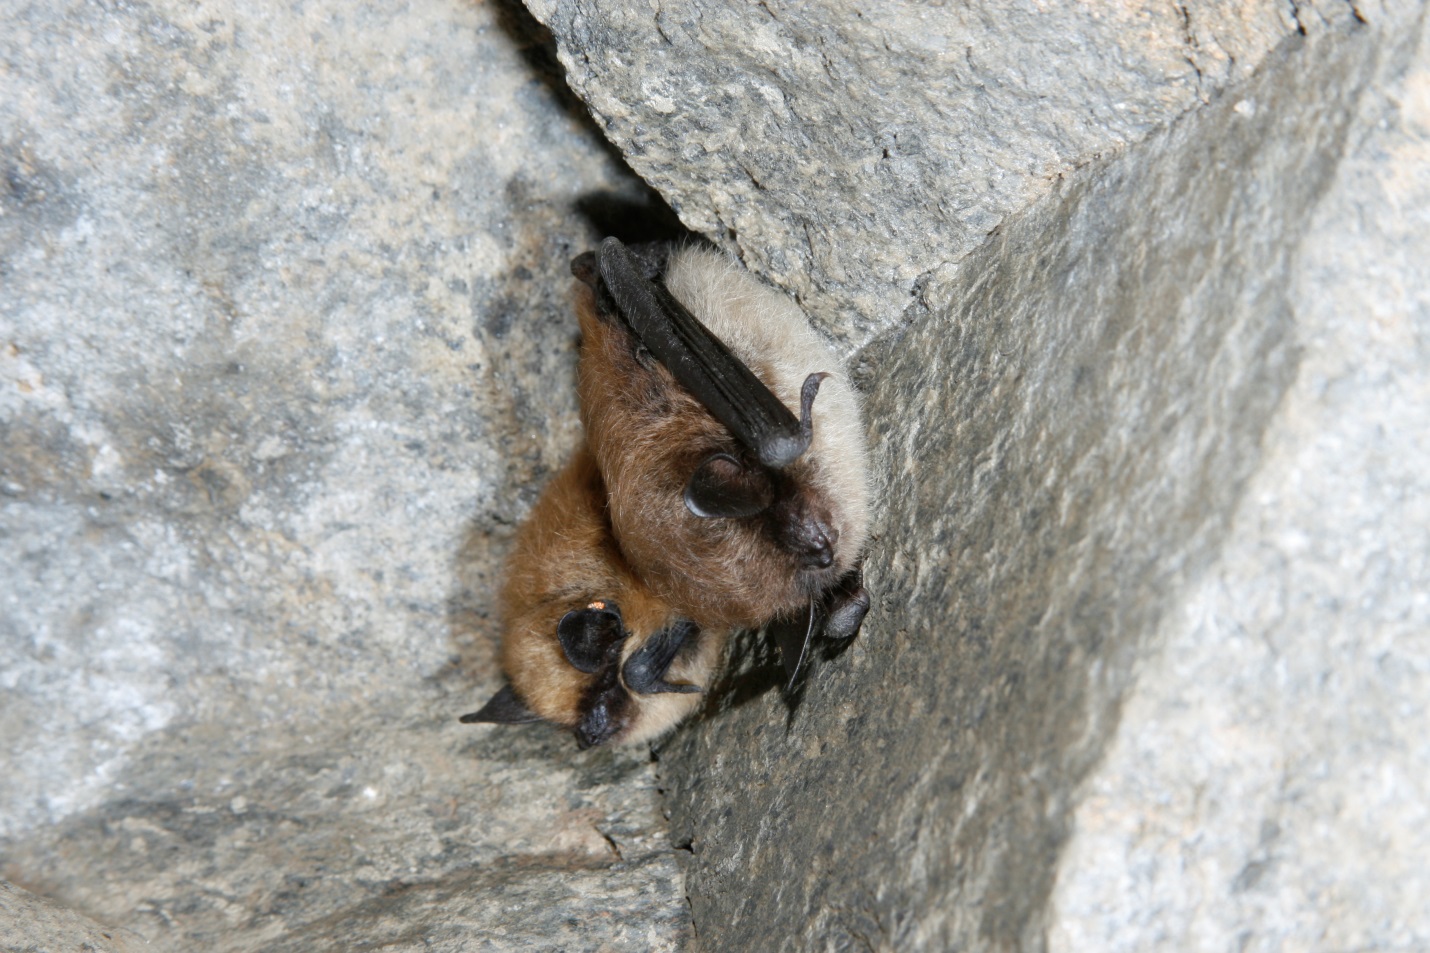 Photograph of an Eastern Small-footed Myotis and a Little Brown Myotis.